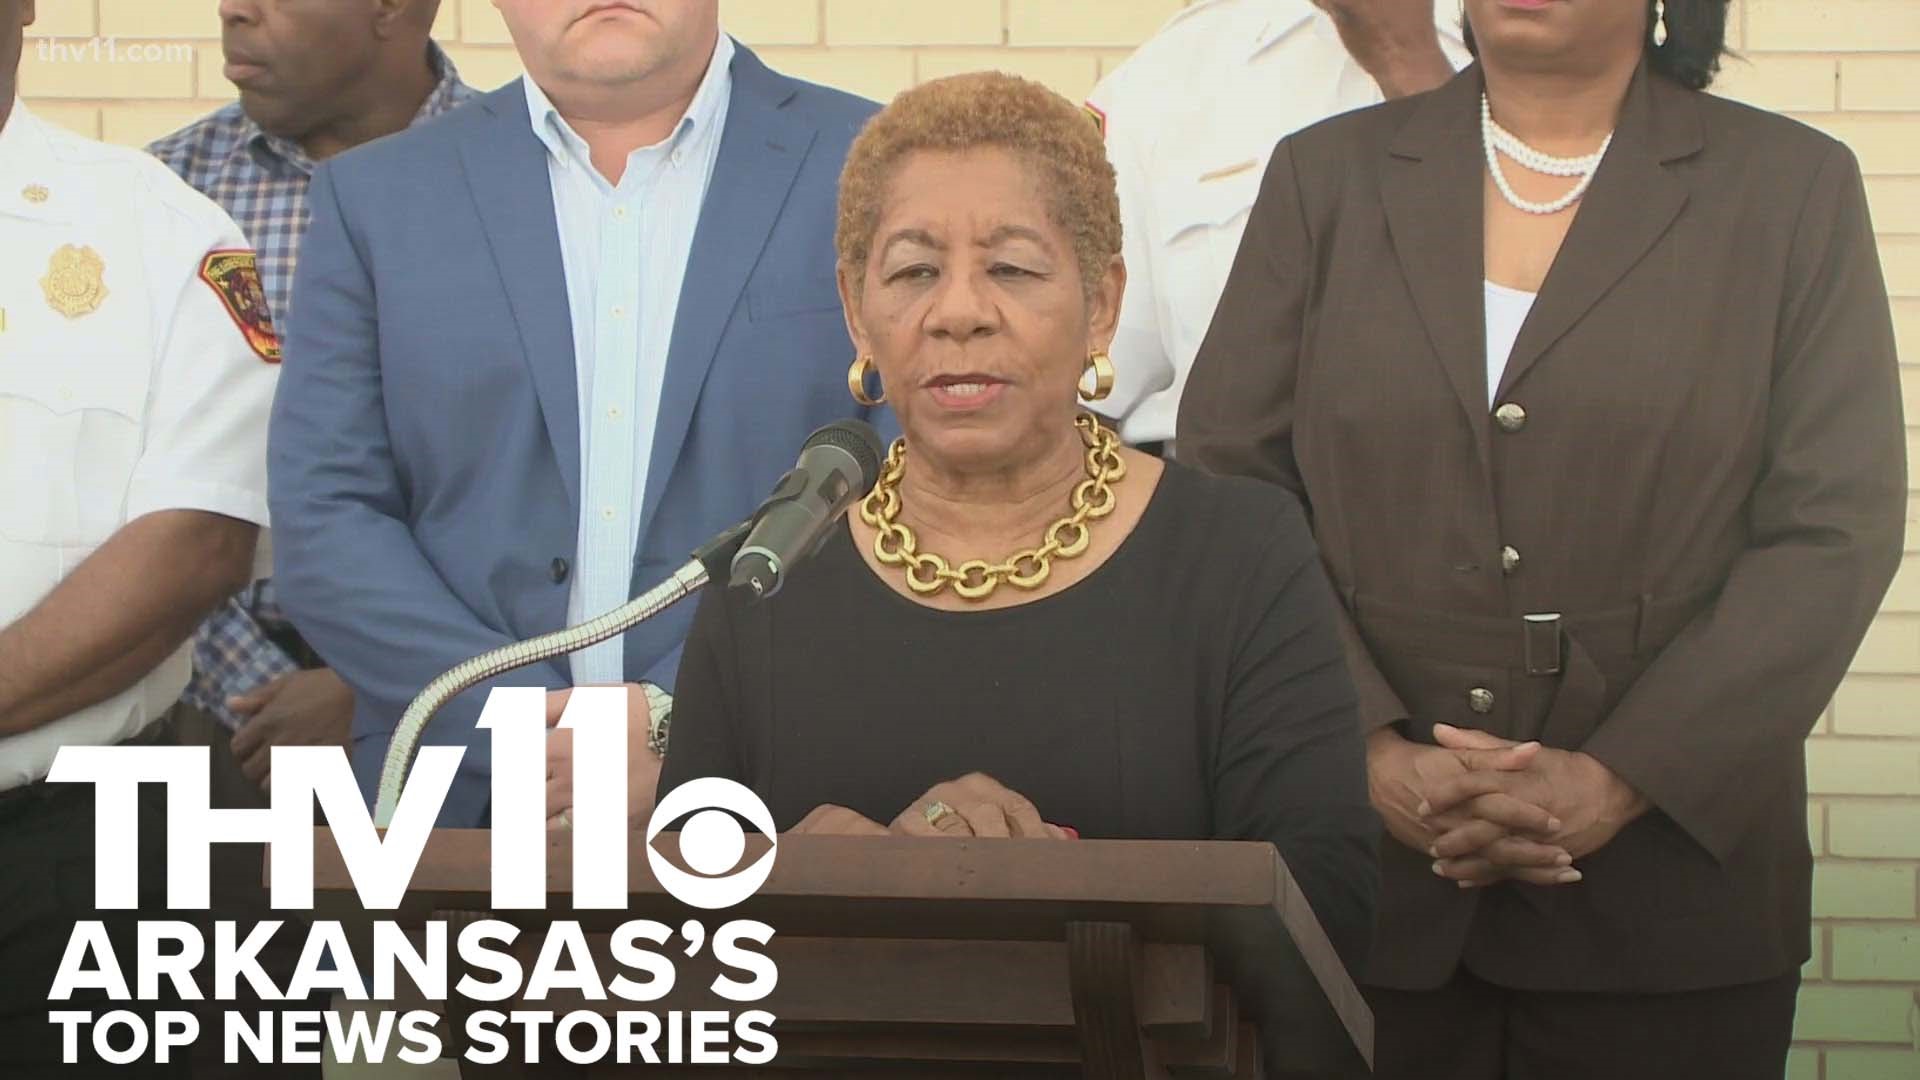 Jurnee Taylor presents Arkansas's top news stories for April 18, 2023, including a proposed sales tax in Pine Bluff and a shooting in Hot Springs.